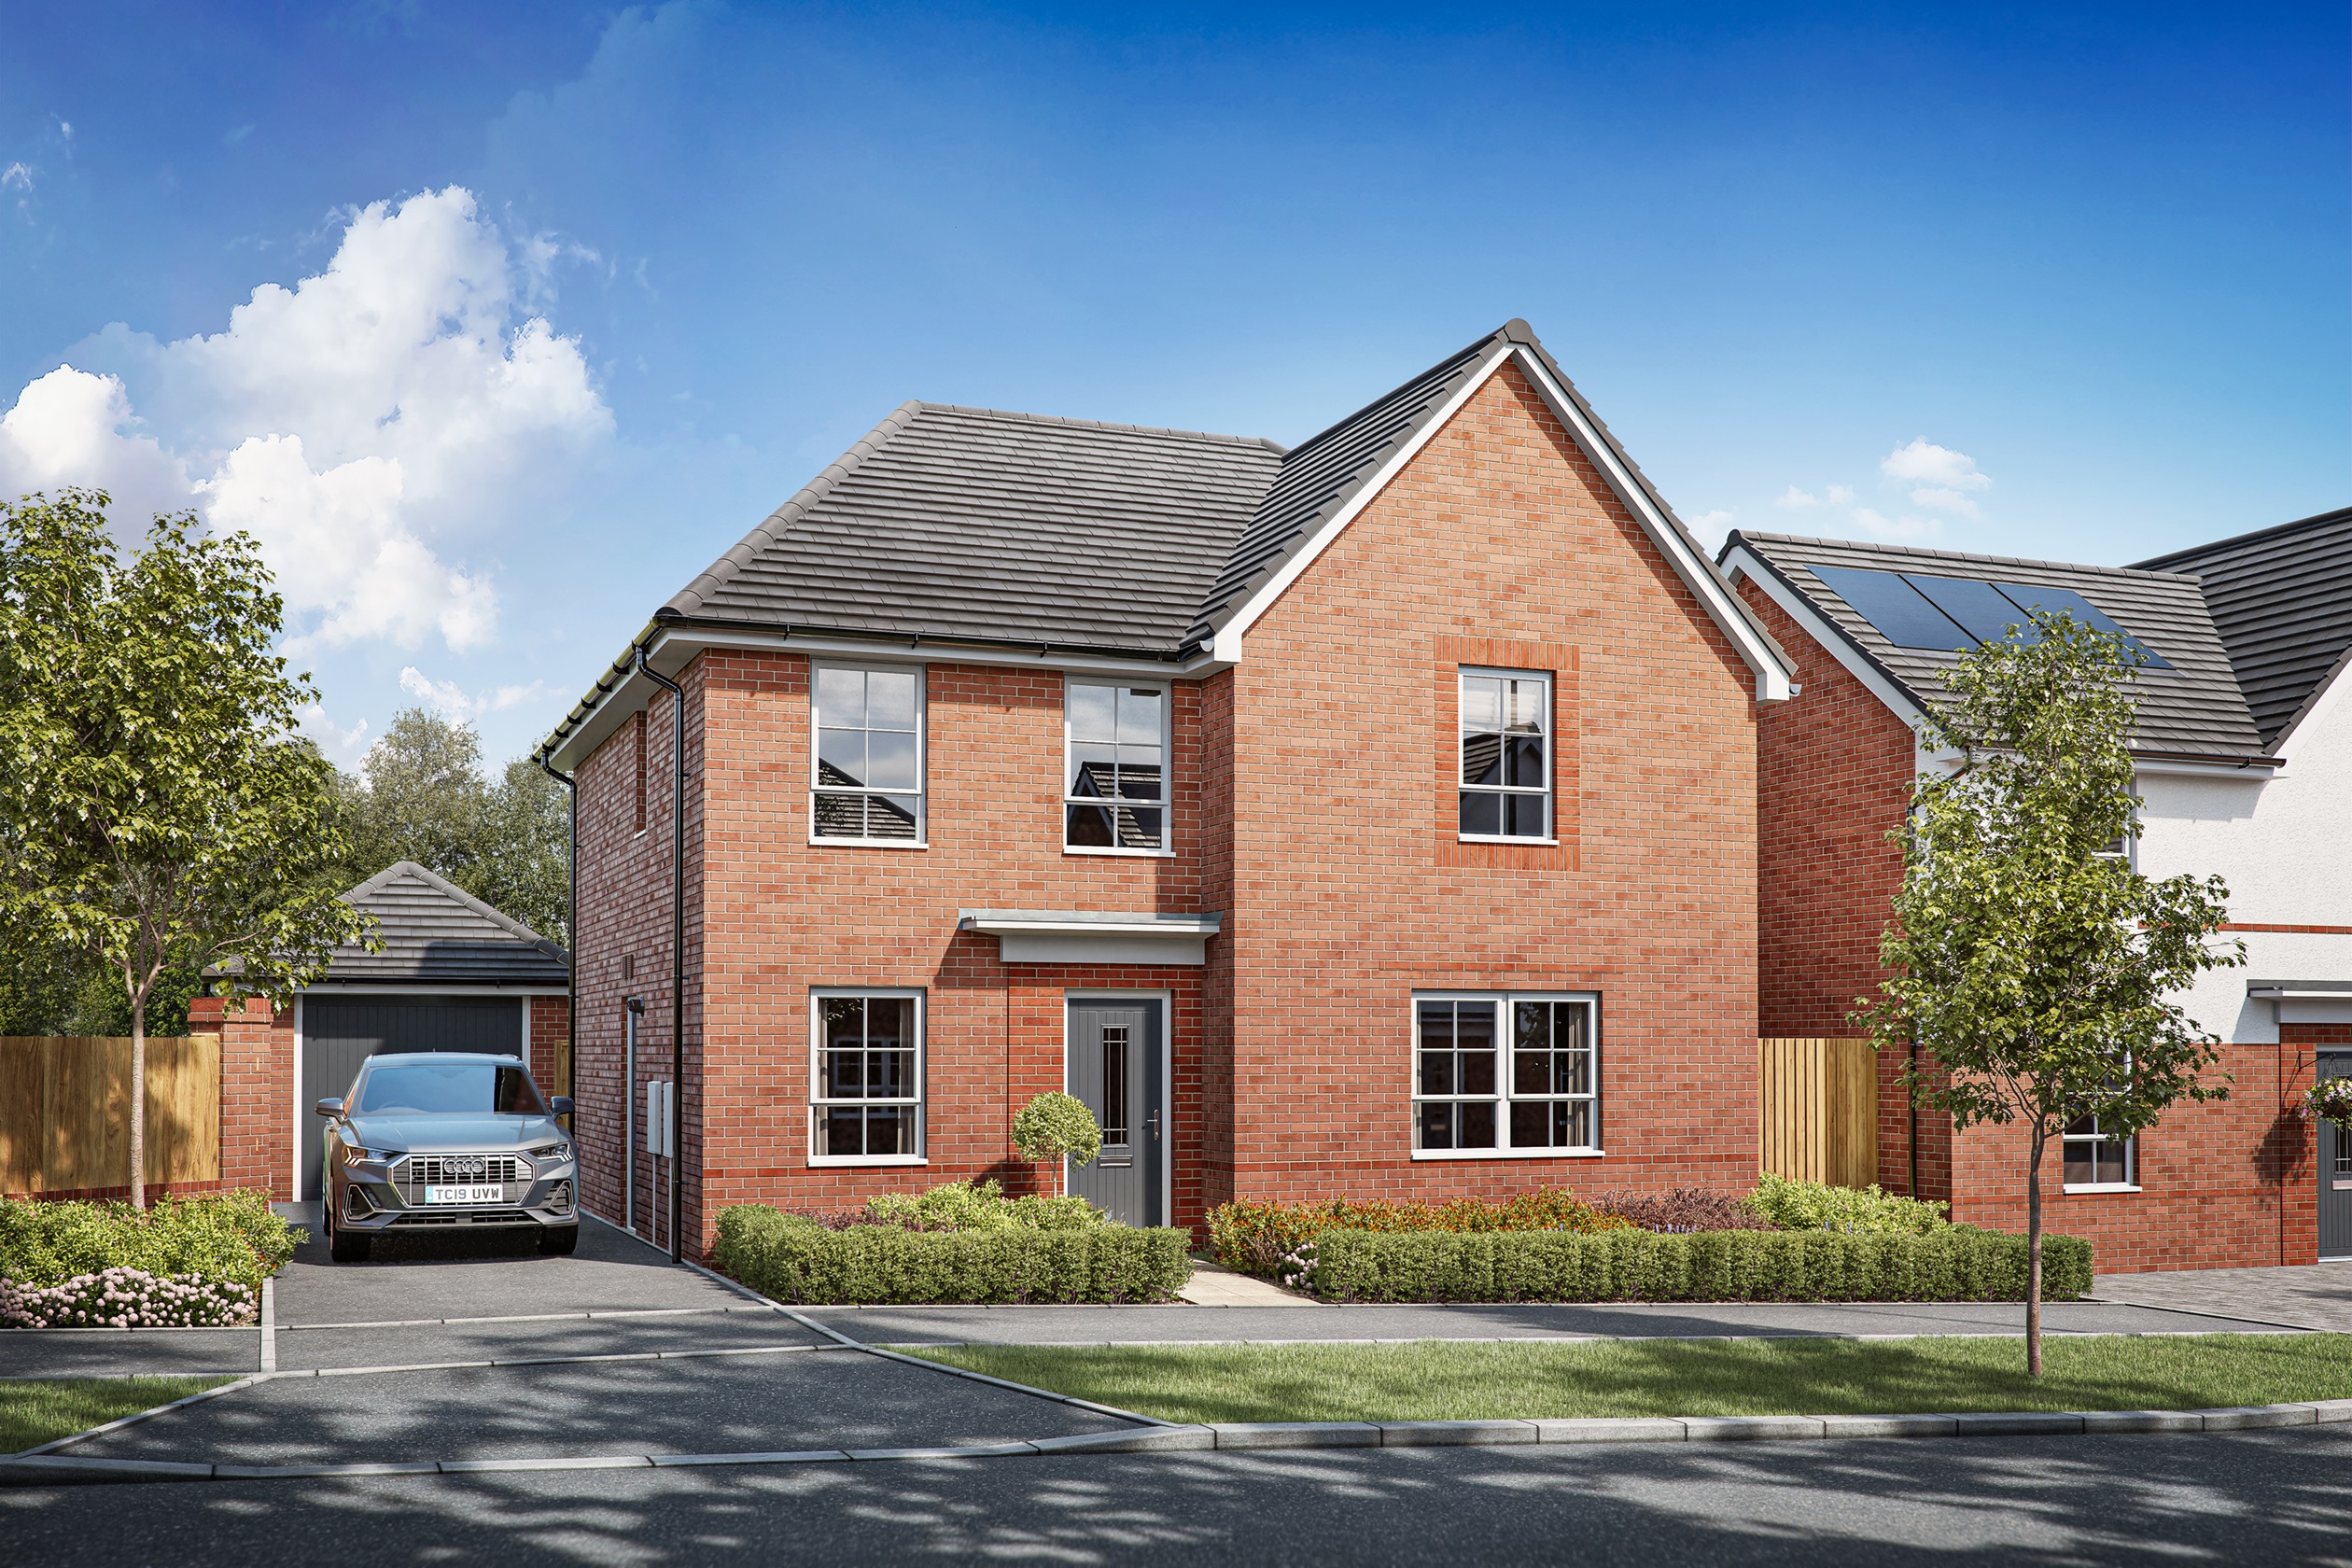 Property 1 of 10. The 4 Bedroom Radleigh At The Poppies